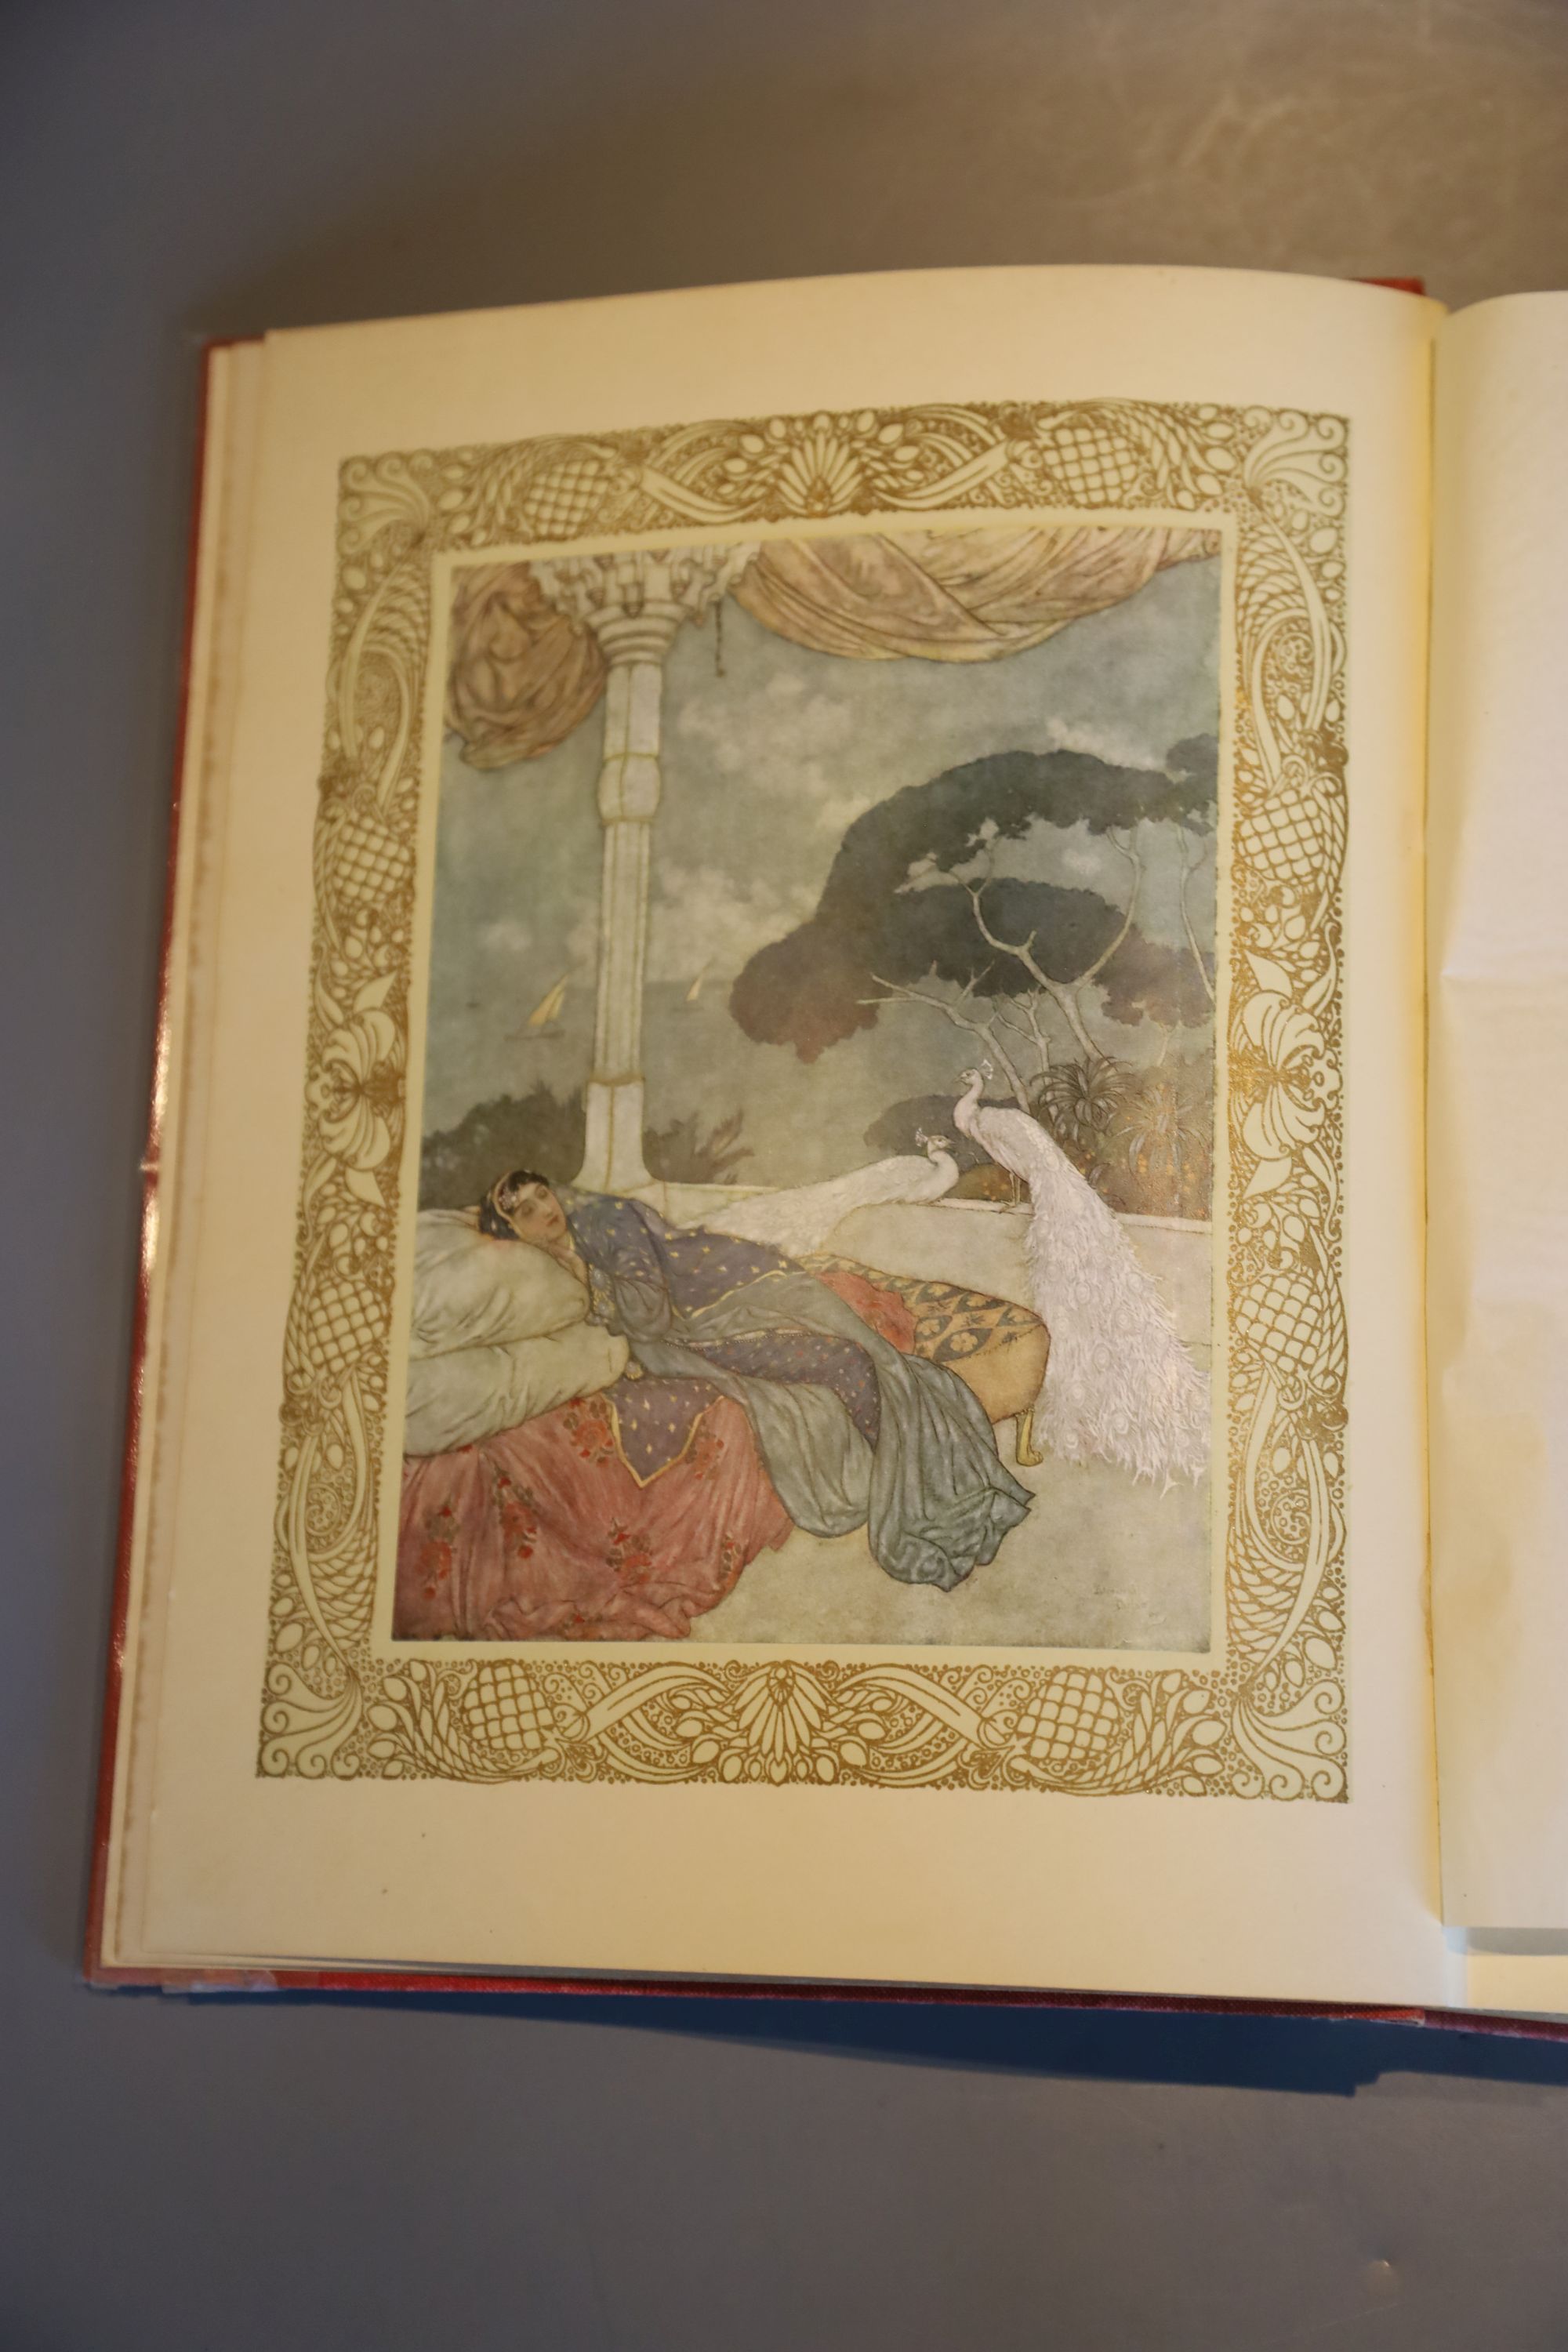 Rubaiyat of Omar Khayyam, Rendered into English Verse by Edward Fitzgerald, with illustrations by Edmund Dulac, decorated and coloured